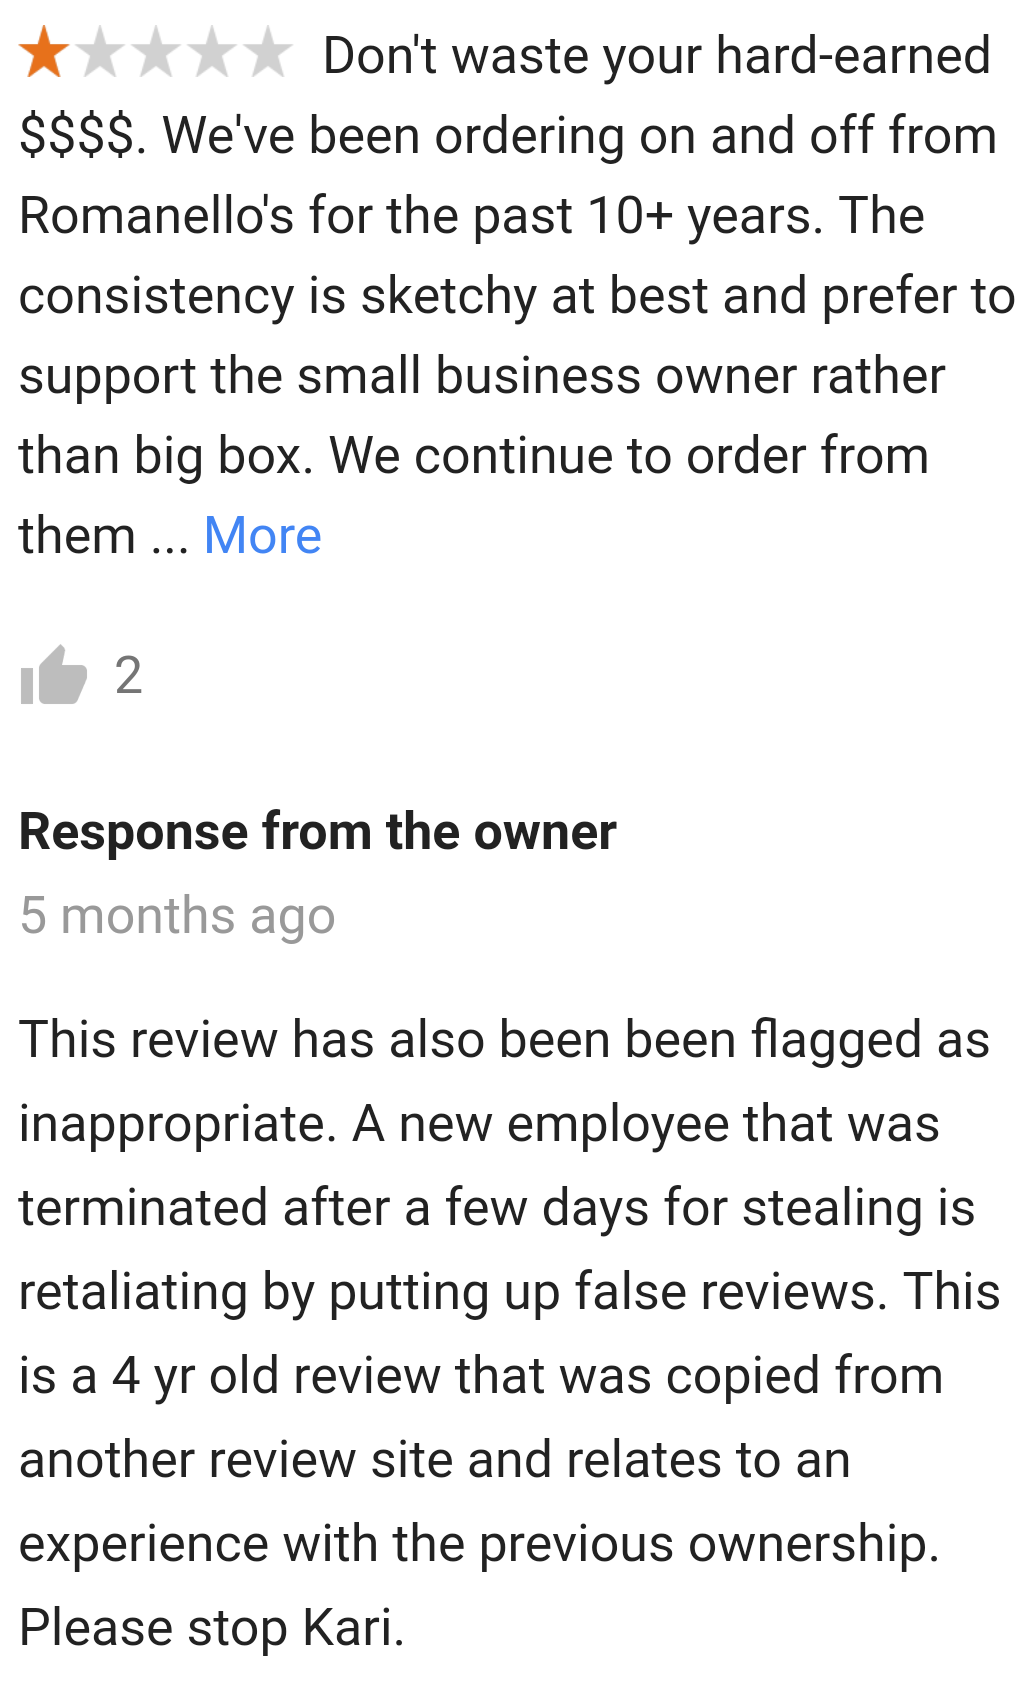 someone who gave a horrible review called out for being a disgruntled employee who just cut and pasted a bad review from somewhere else.